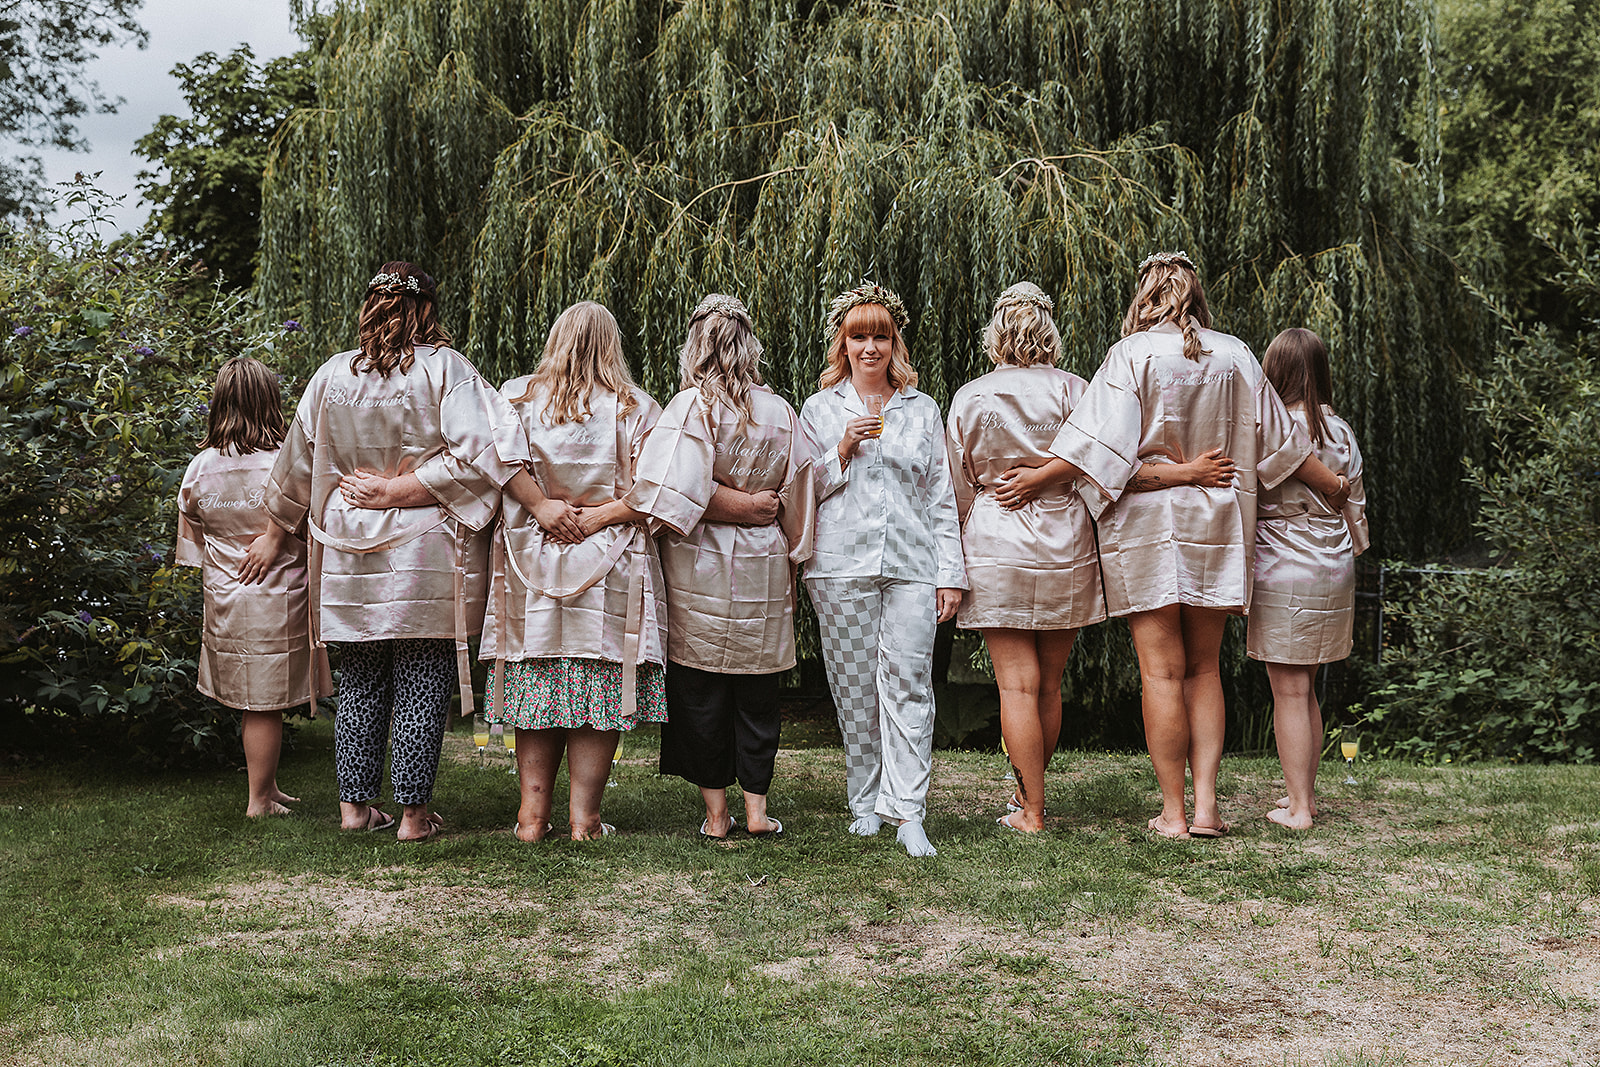 wedding gowns dressing gowns bridesmaids toasting wedding photographer photography Hertfordshire  